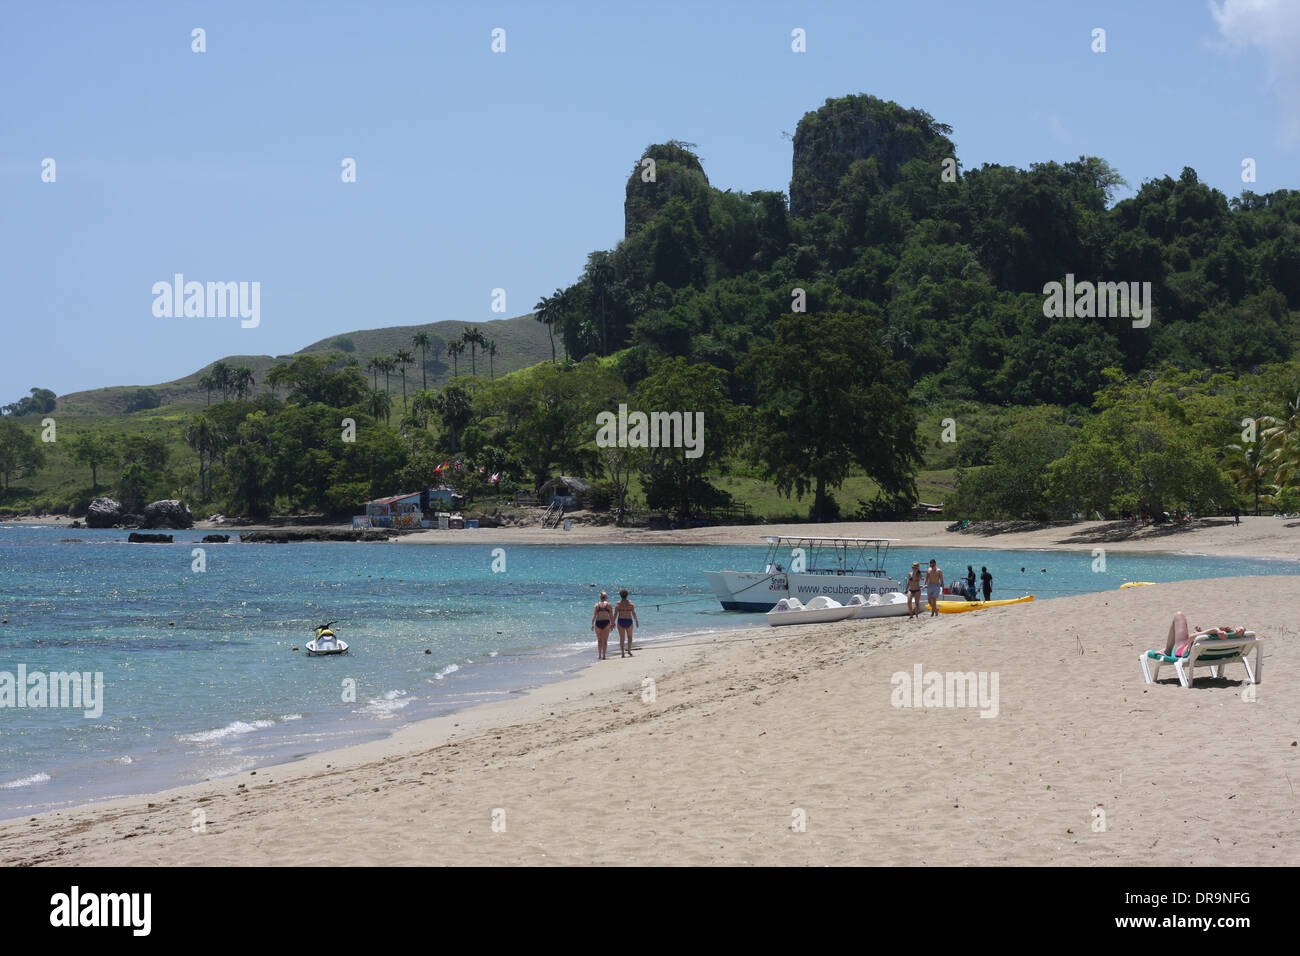 Lanscape of the beach in Puerto Plata, Dominican Republic Stock Photo